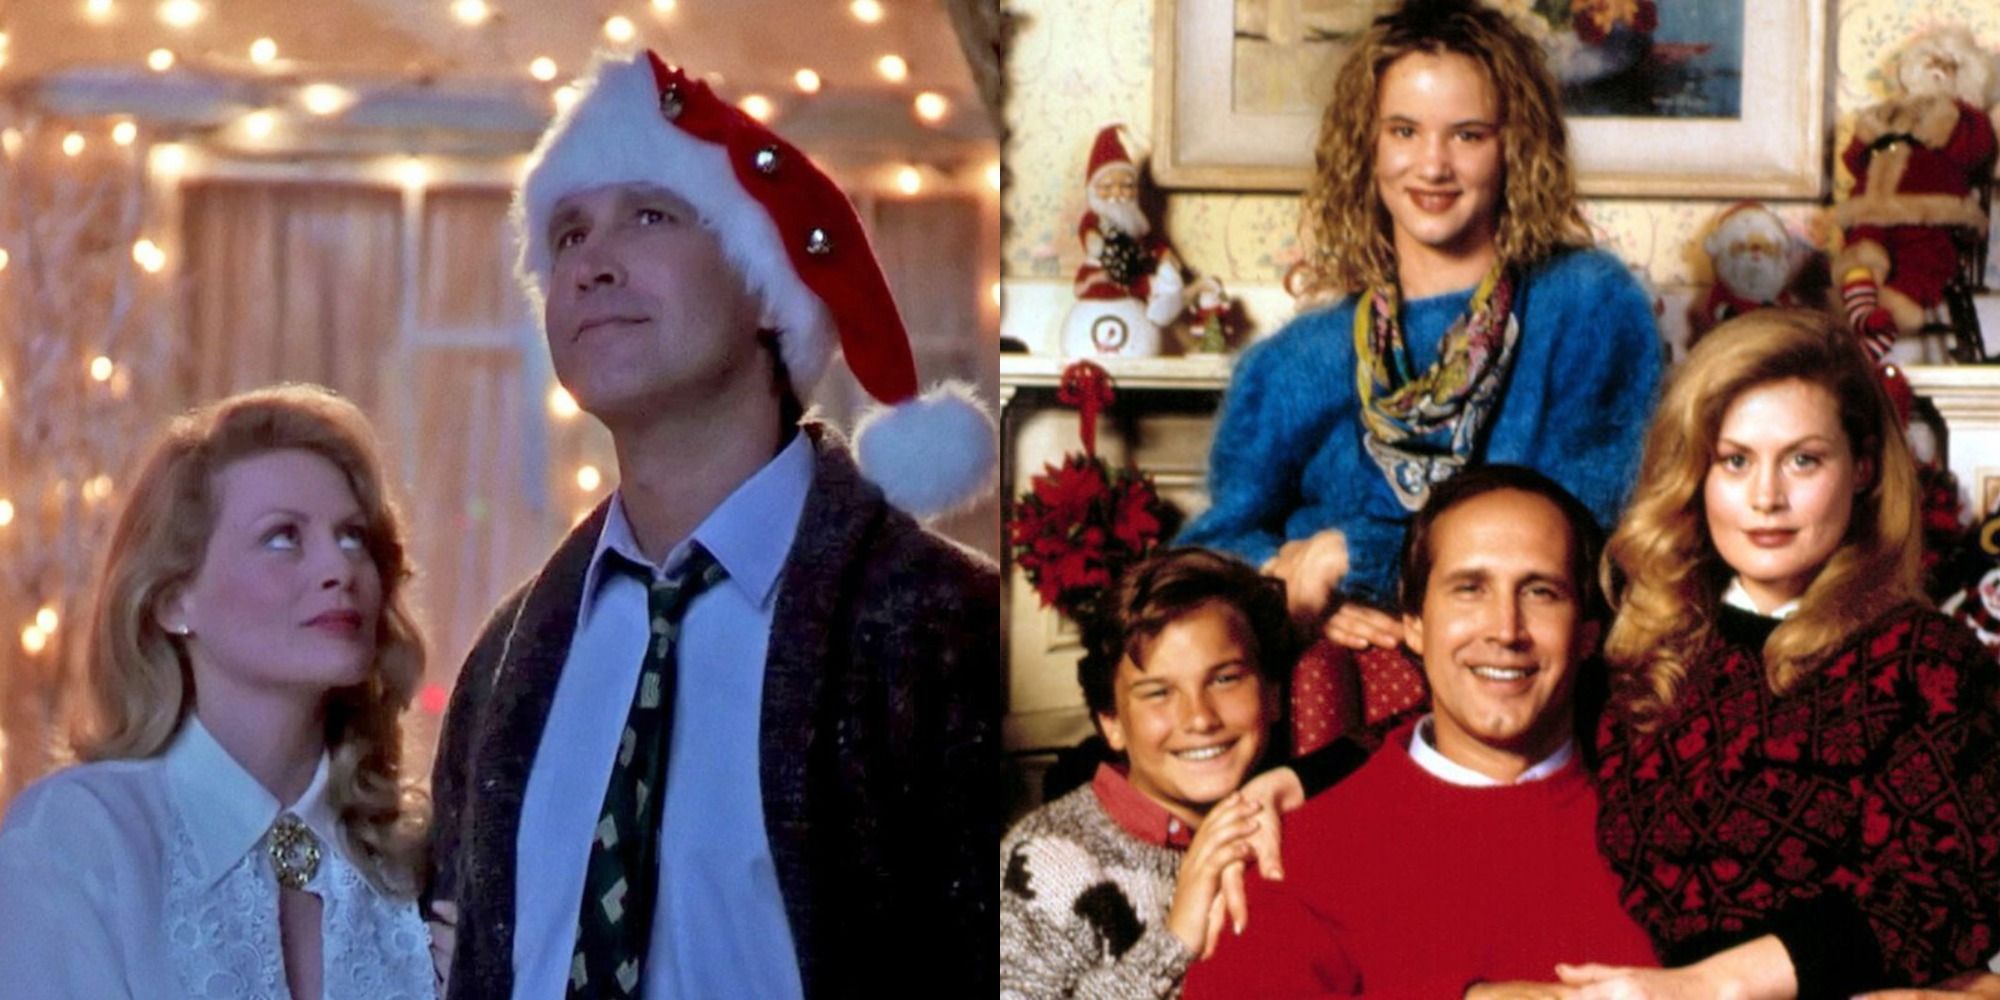 Split image showing Clark and Ellen outside, and the Griswold family together in National-Lampoon's-Christmas-Vacation